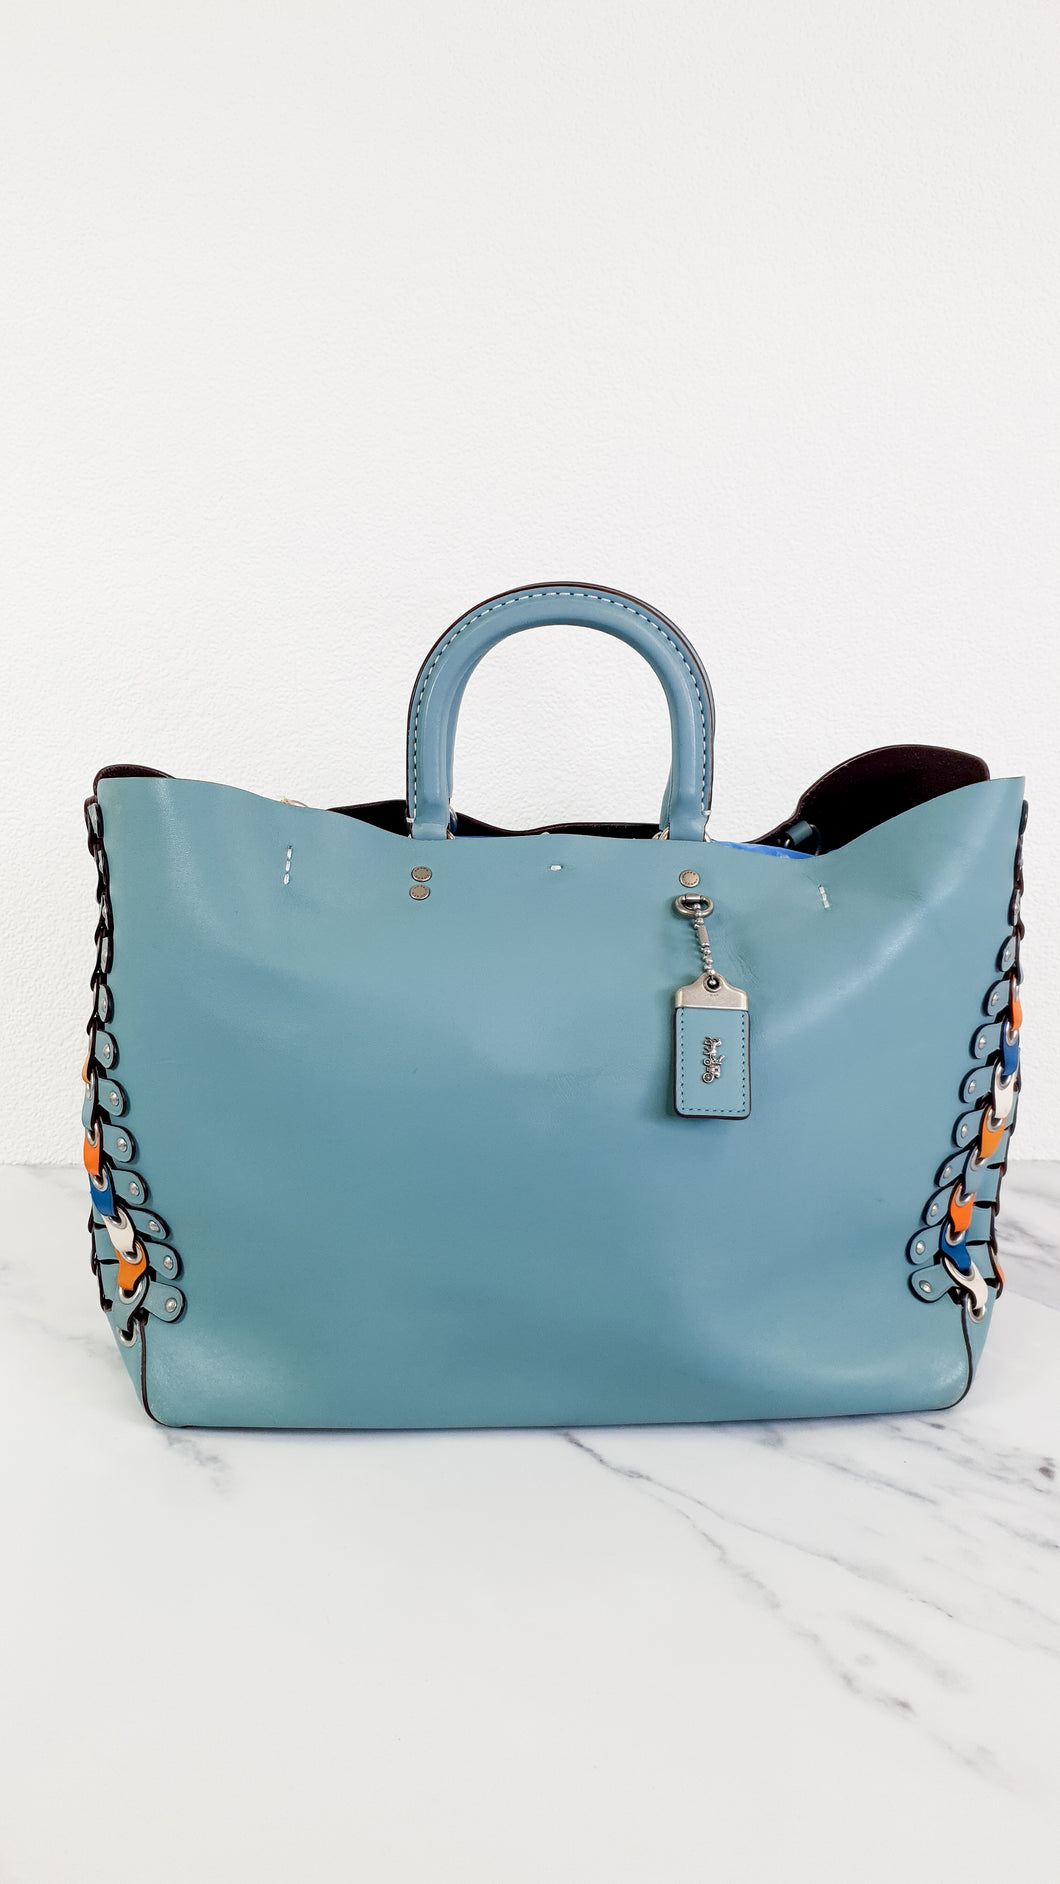 Coach 1941 Rogue Tote Bag With Links in Steel Blue Smooth Leather Handbag Shoulder Bag - Coach 86809